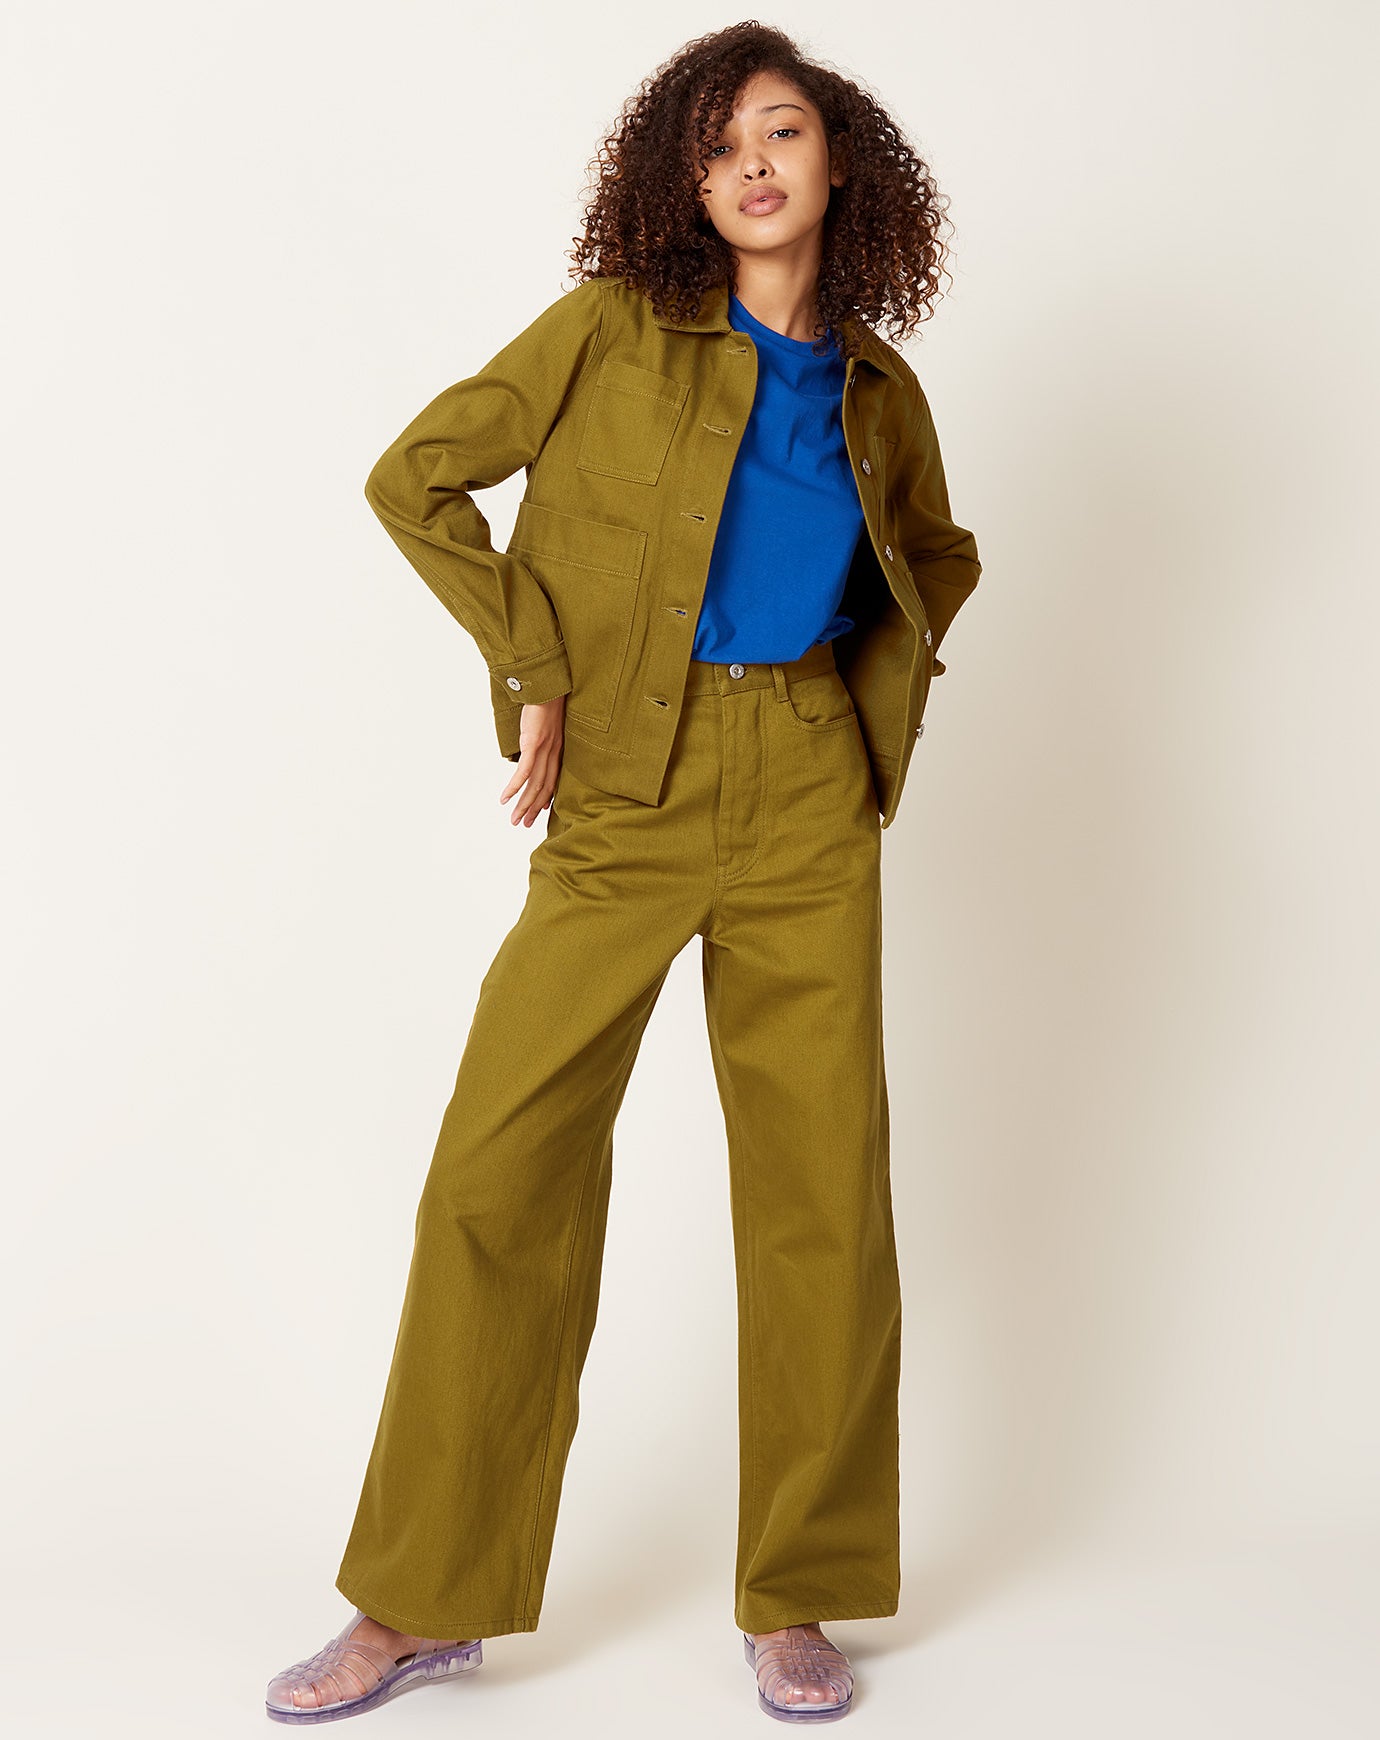 Kowtow Story Jacket in Chartreuse